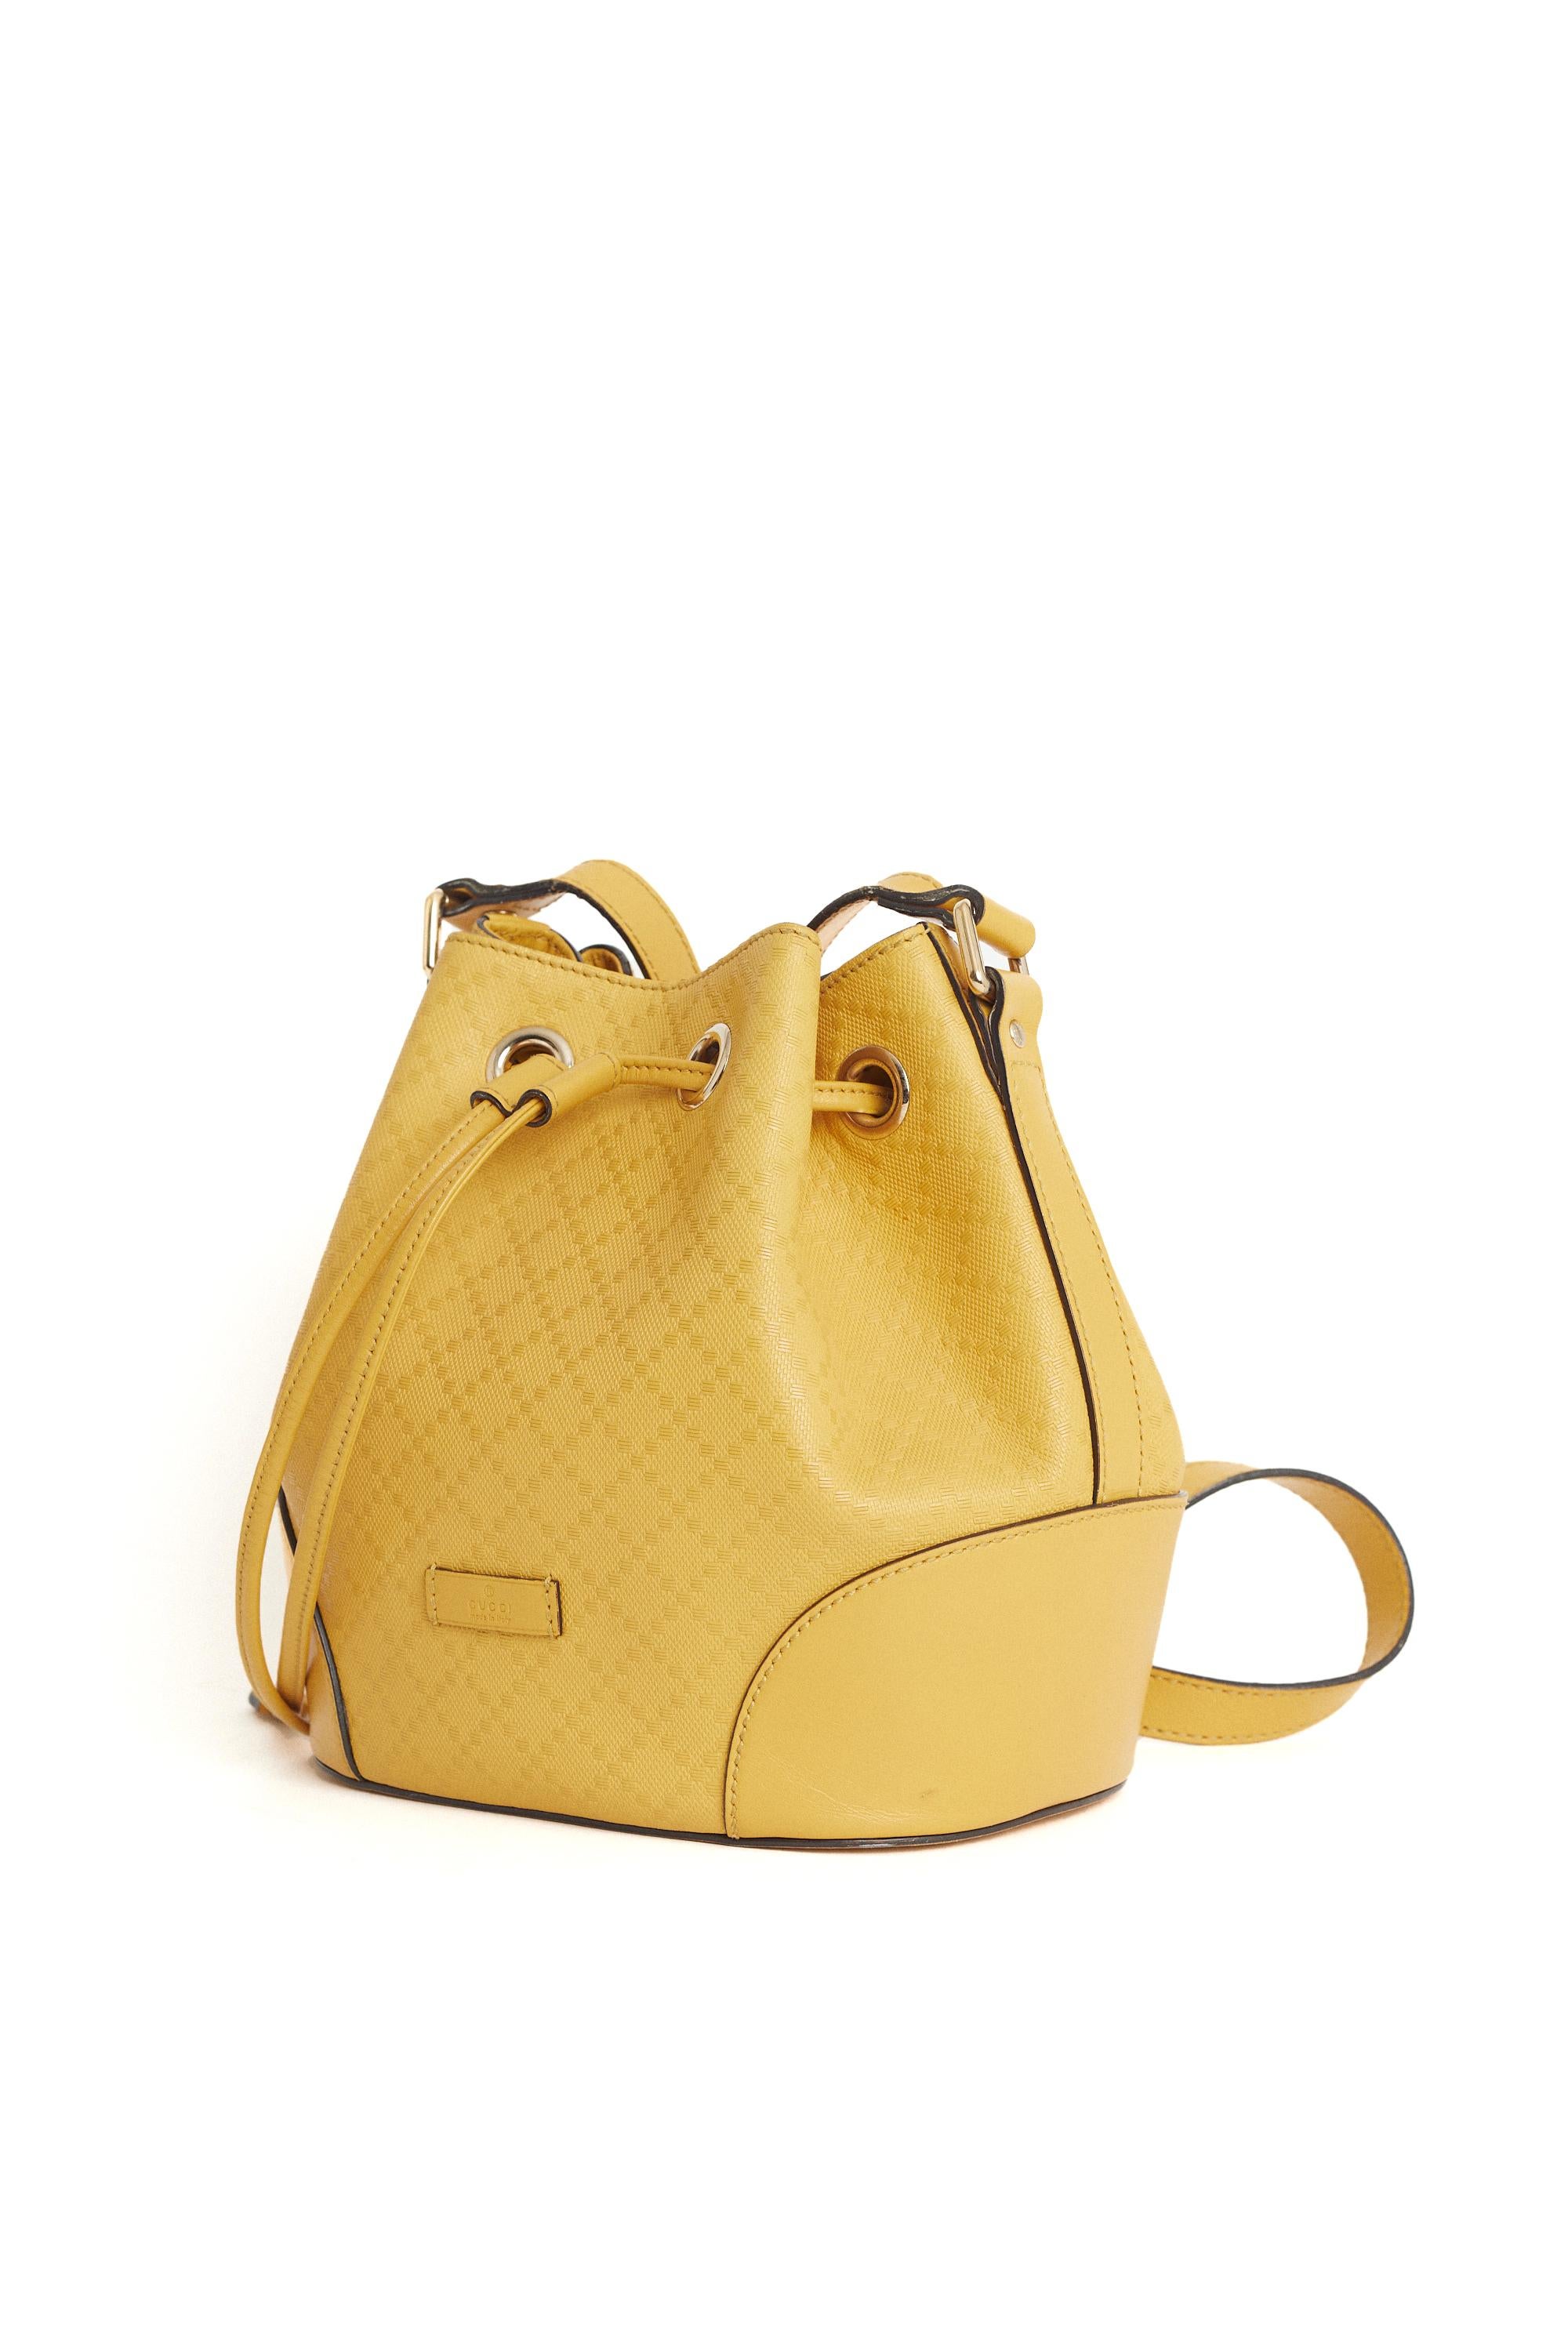 Vintage 2000’s Gucci yellow diamante embossed bucket bag. Features an adjustable flat leather shoulder strap, open top with drawstring closure,  interior zip and slip pockets. Pre-loved, in excellent vintage condition - never been worn.

Brand: